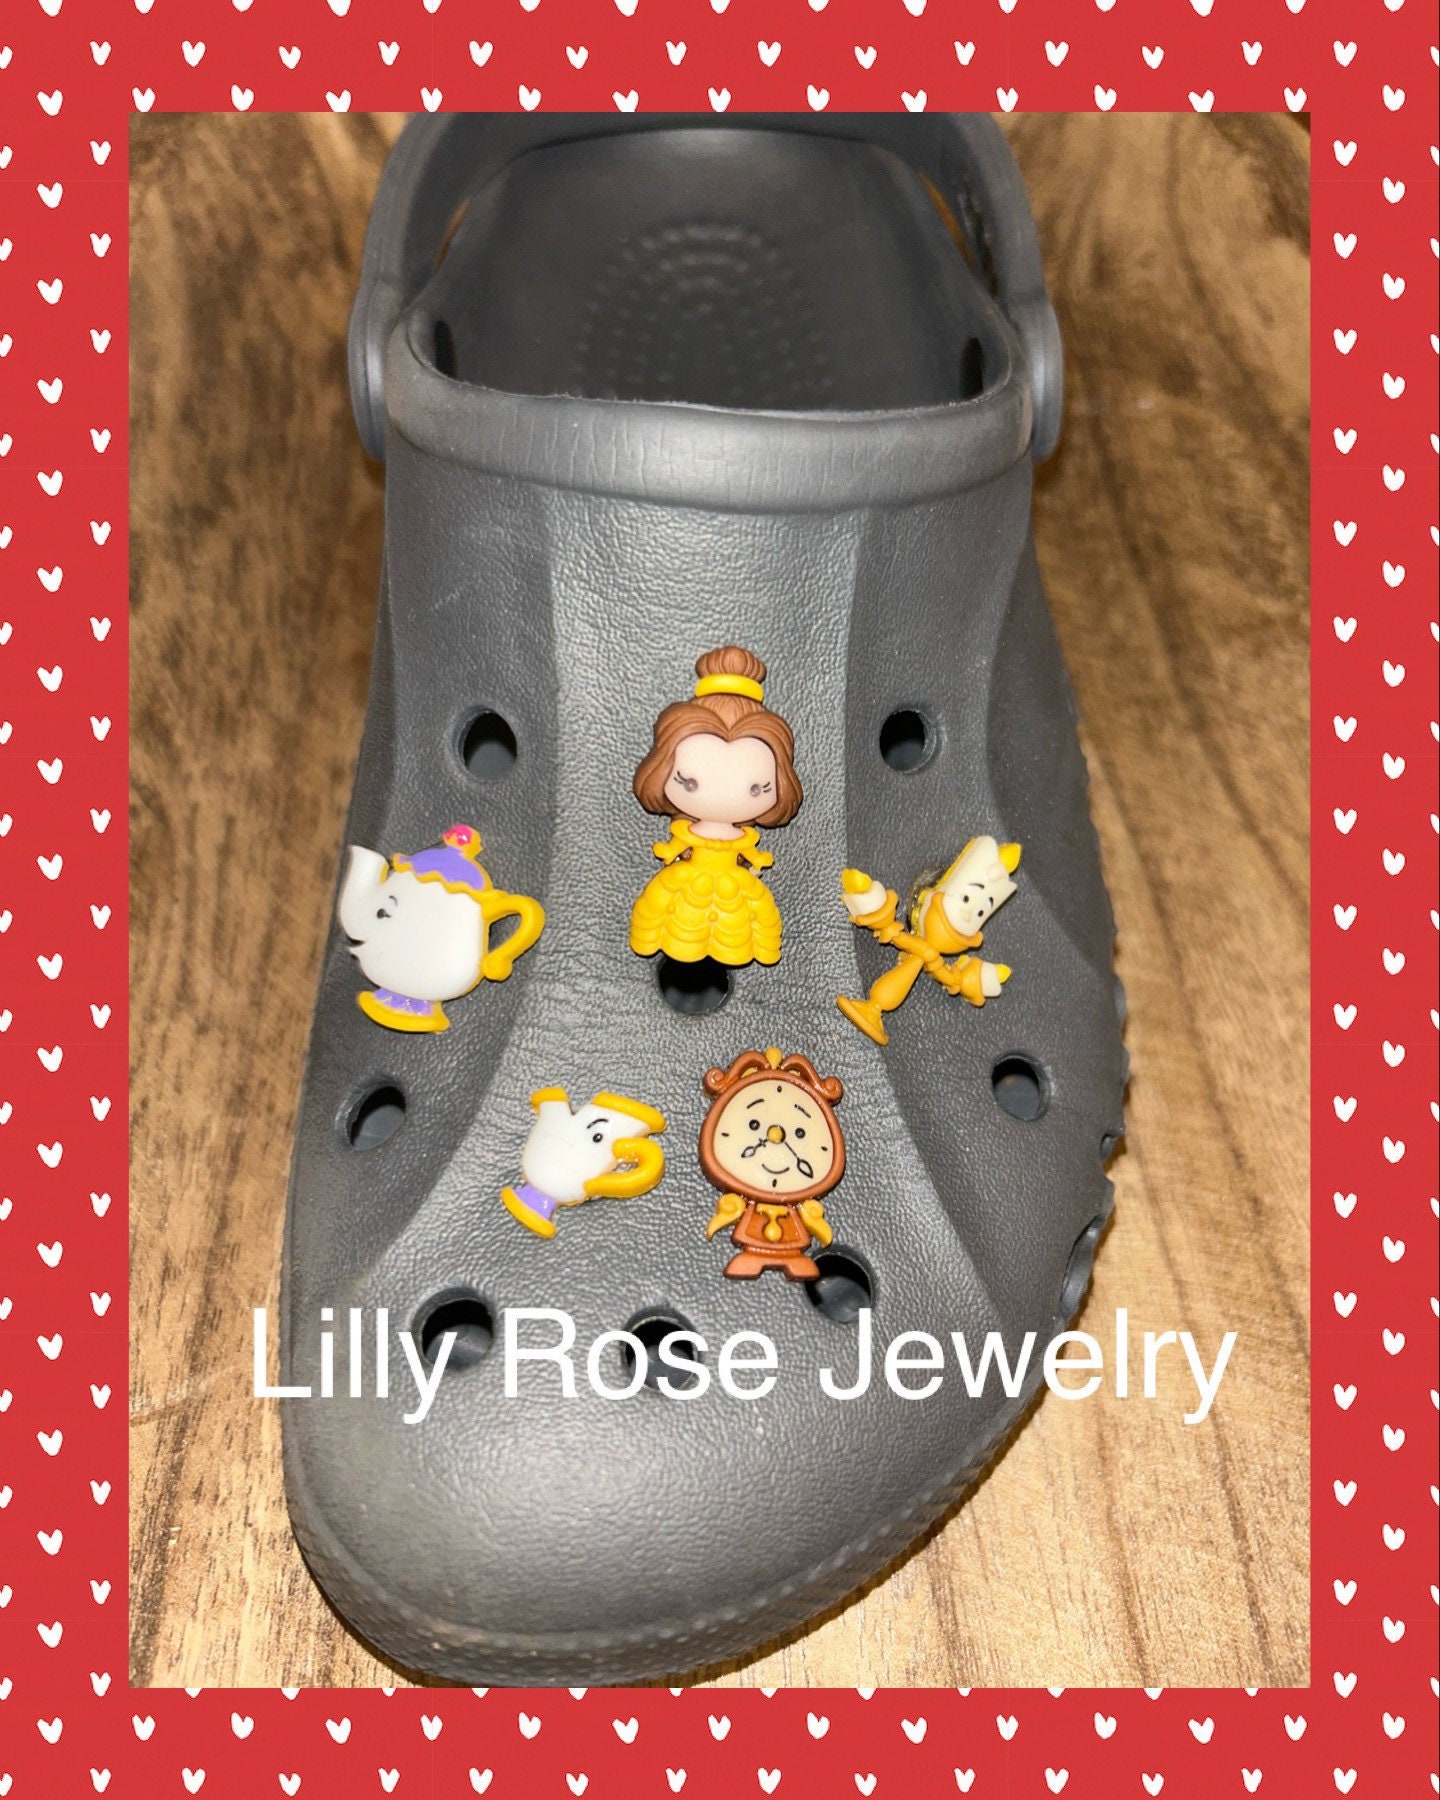 Belle Designer Baby Crocs With Charms – PinkIce Novelty